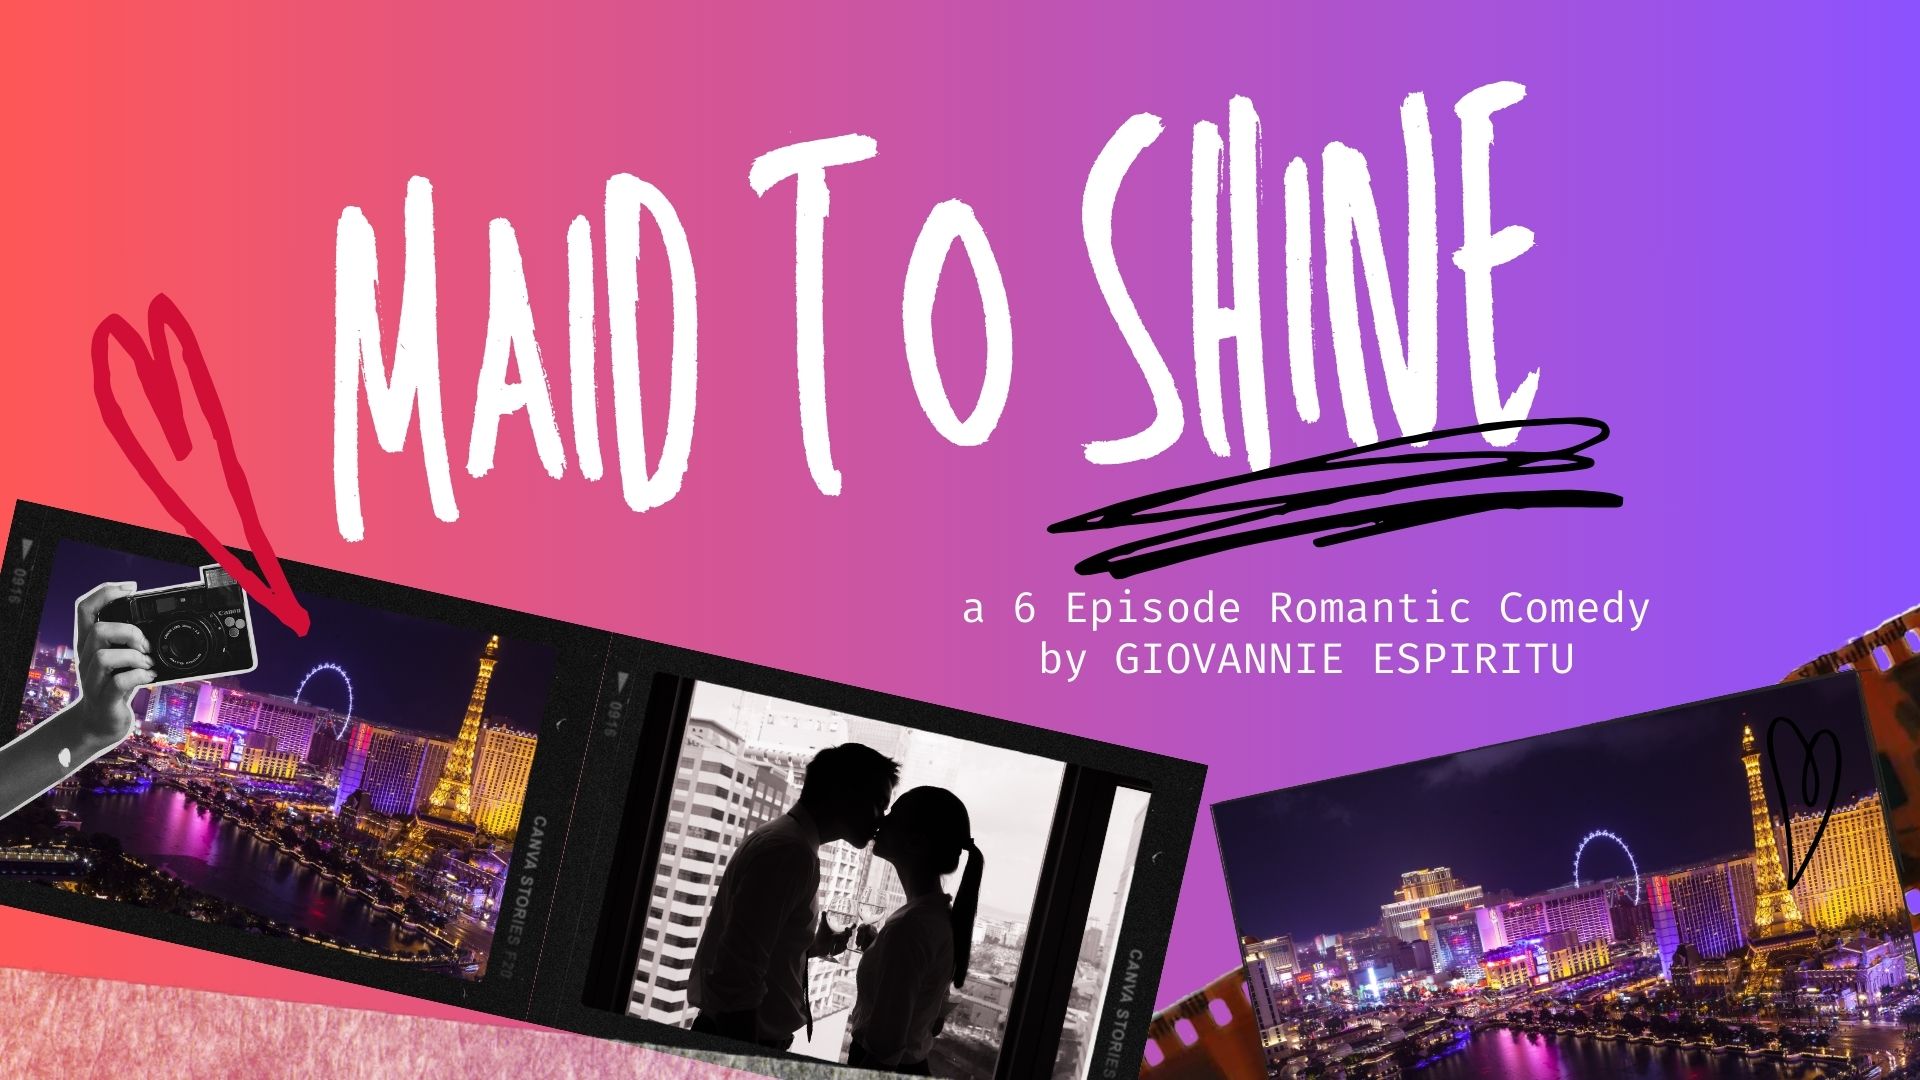 FilAmTV Network Announces New Six-Episode Romantic Comedy Series "Maid to Shine"